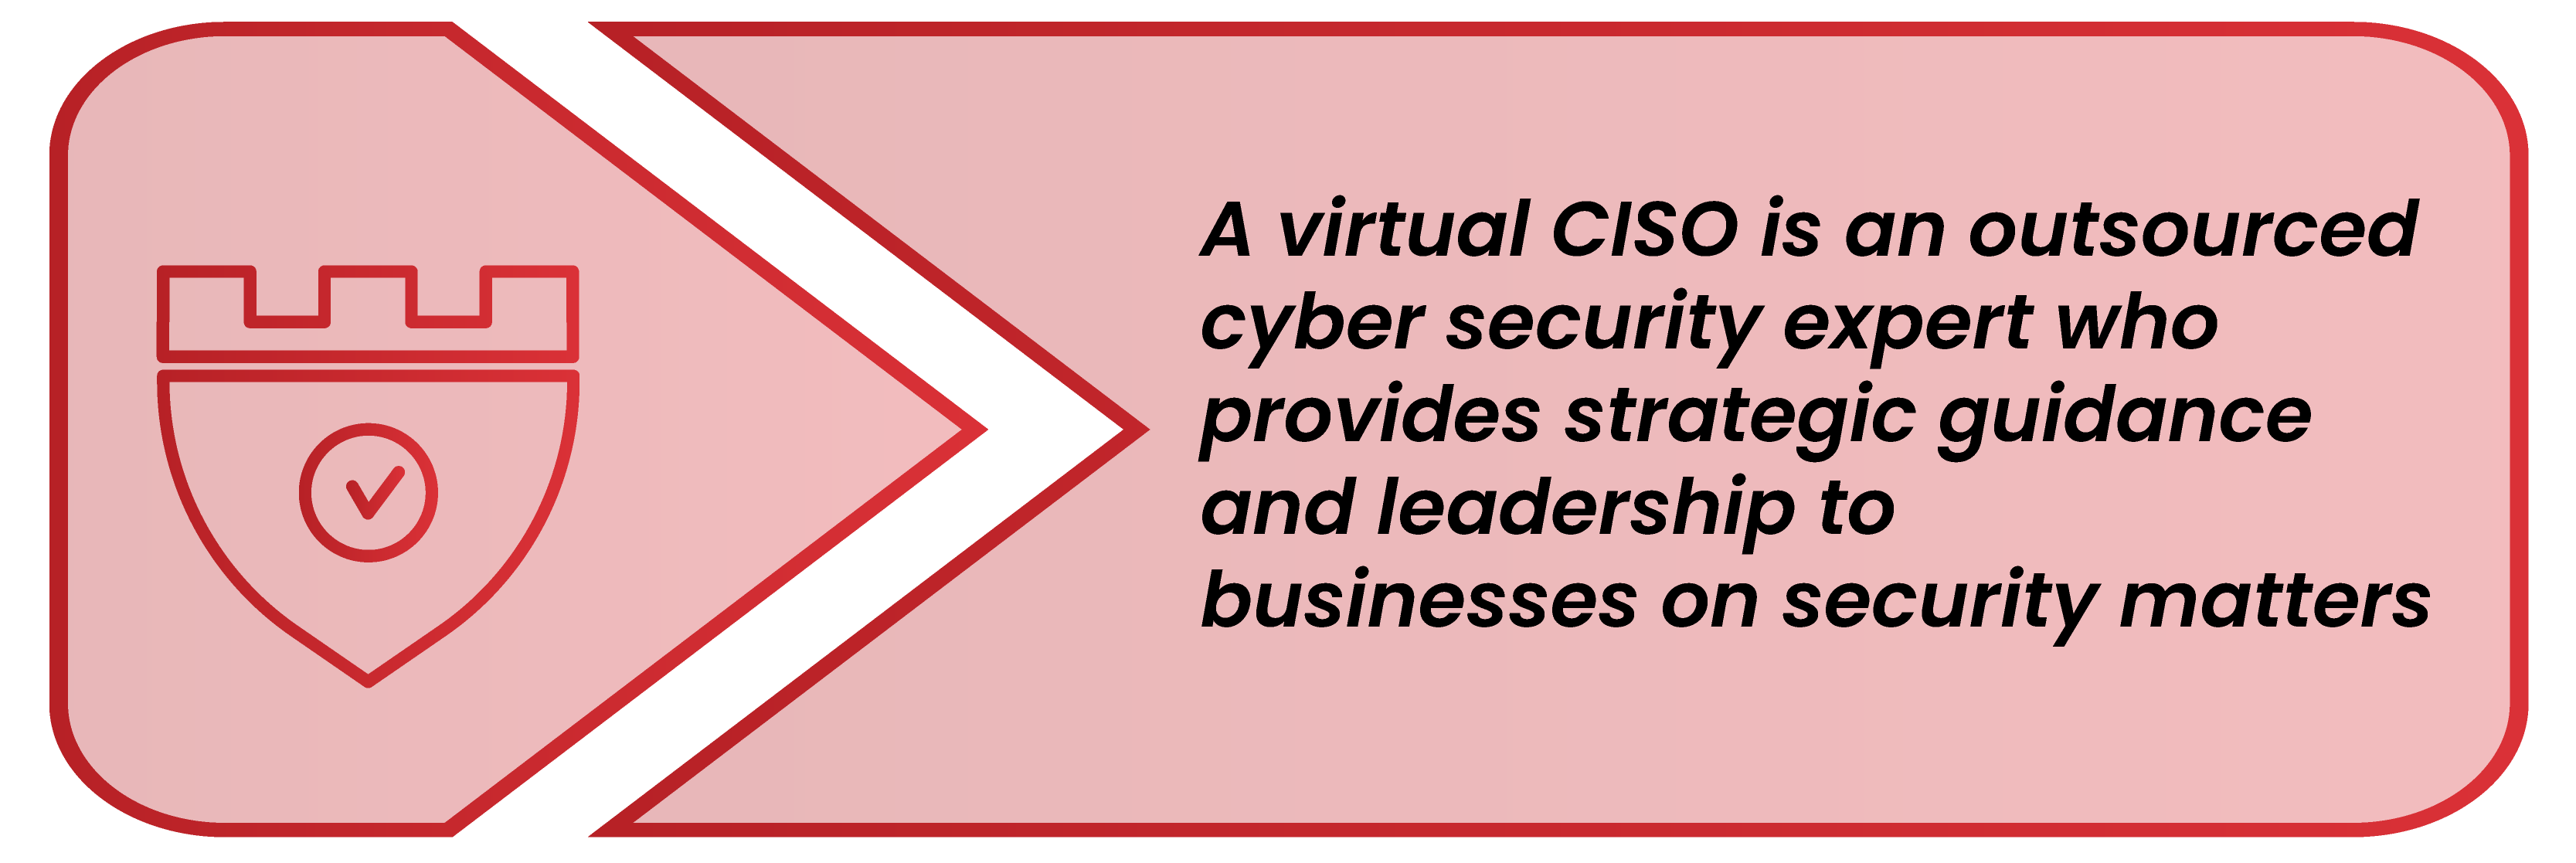 What is a Virtual CISO?